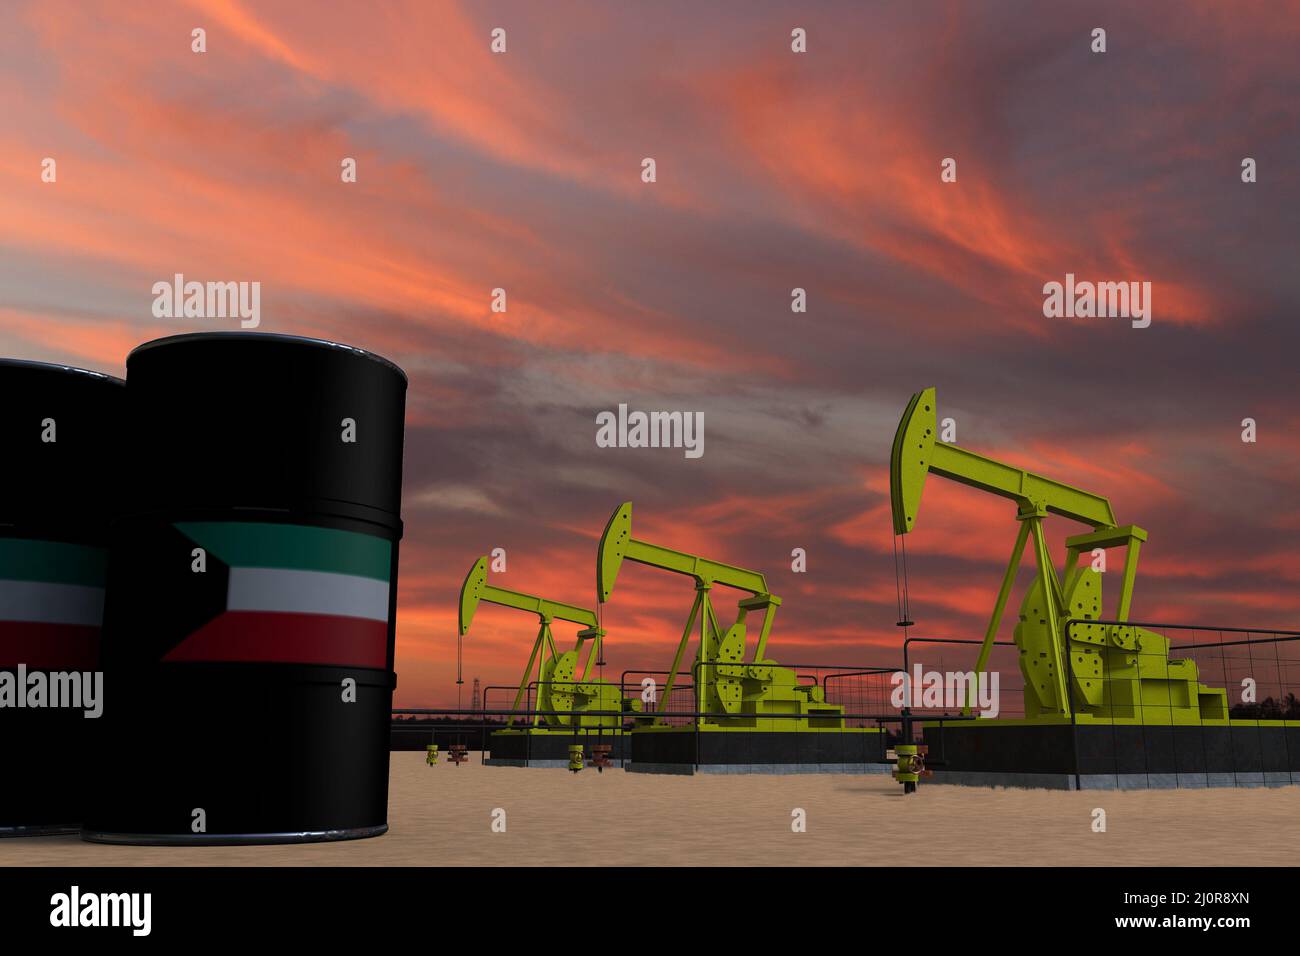 Nice pumpjack oil extraction and cloudy sky in sunset with the KUWAIT flag on oil barrels 3D rendering Stock Photo